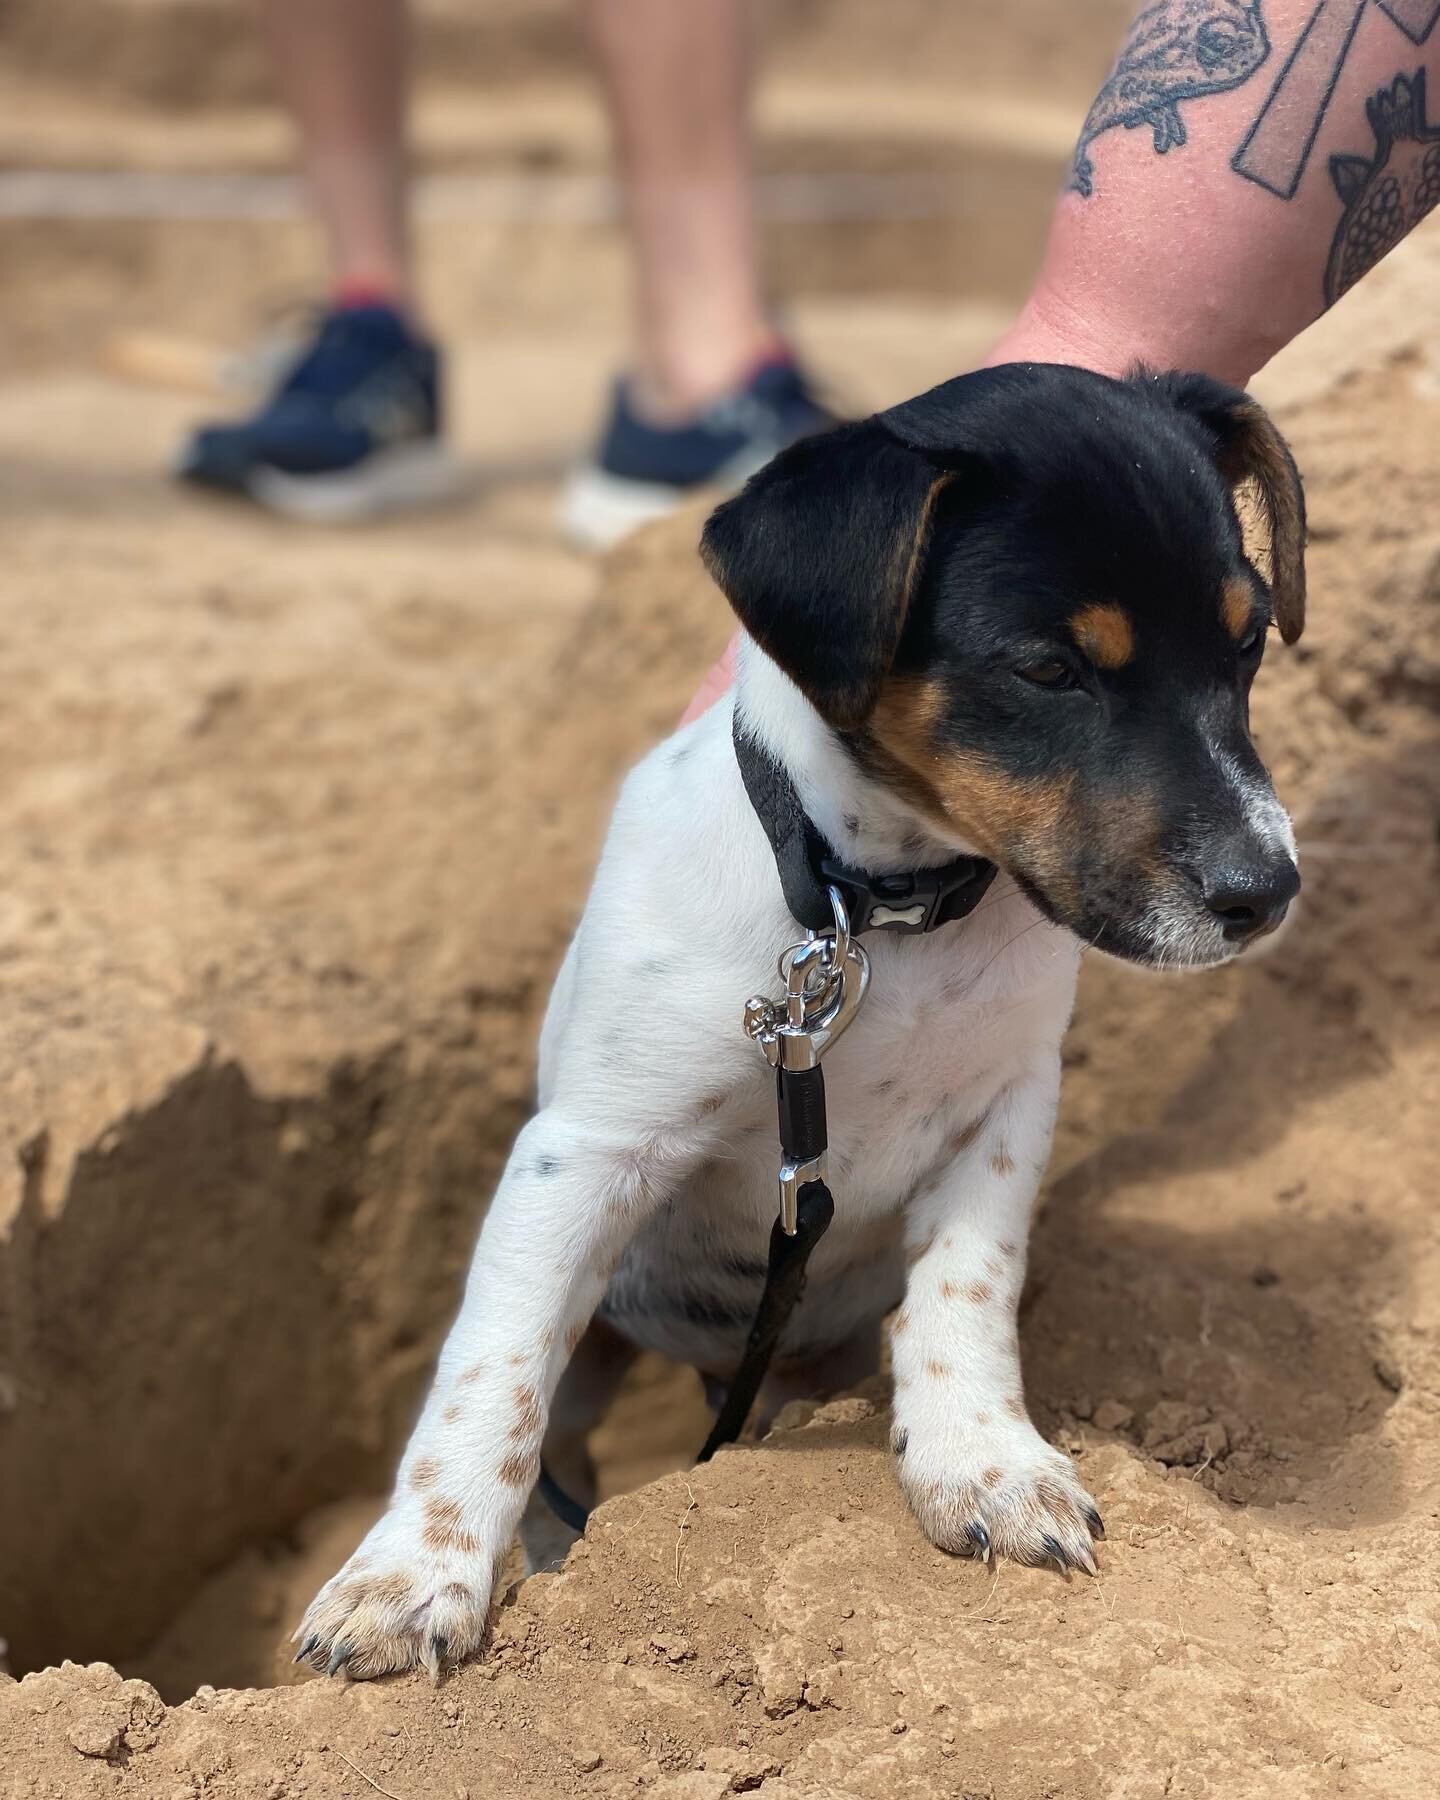 Today marked our last day of digging before filling in tomorrow. Thousands of you stopped by the site and made this dog so very special. A huge shout out to our amazing volunteers and dedicated students, all made possible with the help of some incred